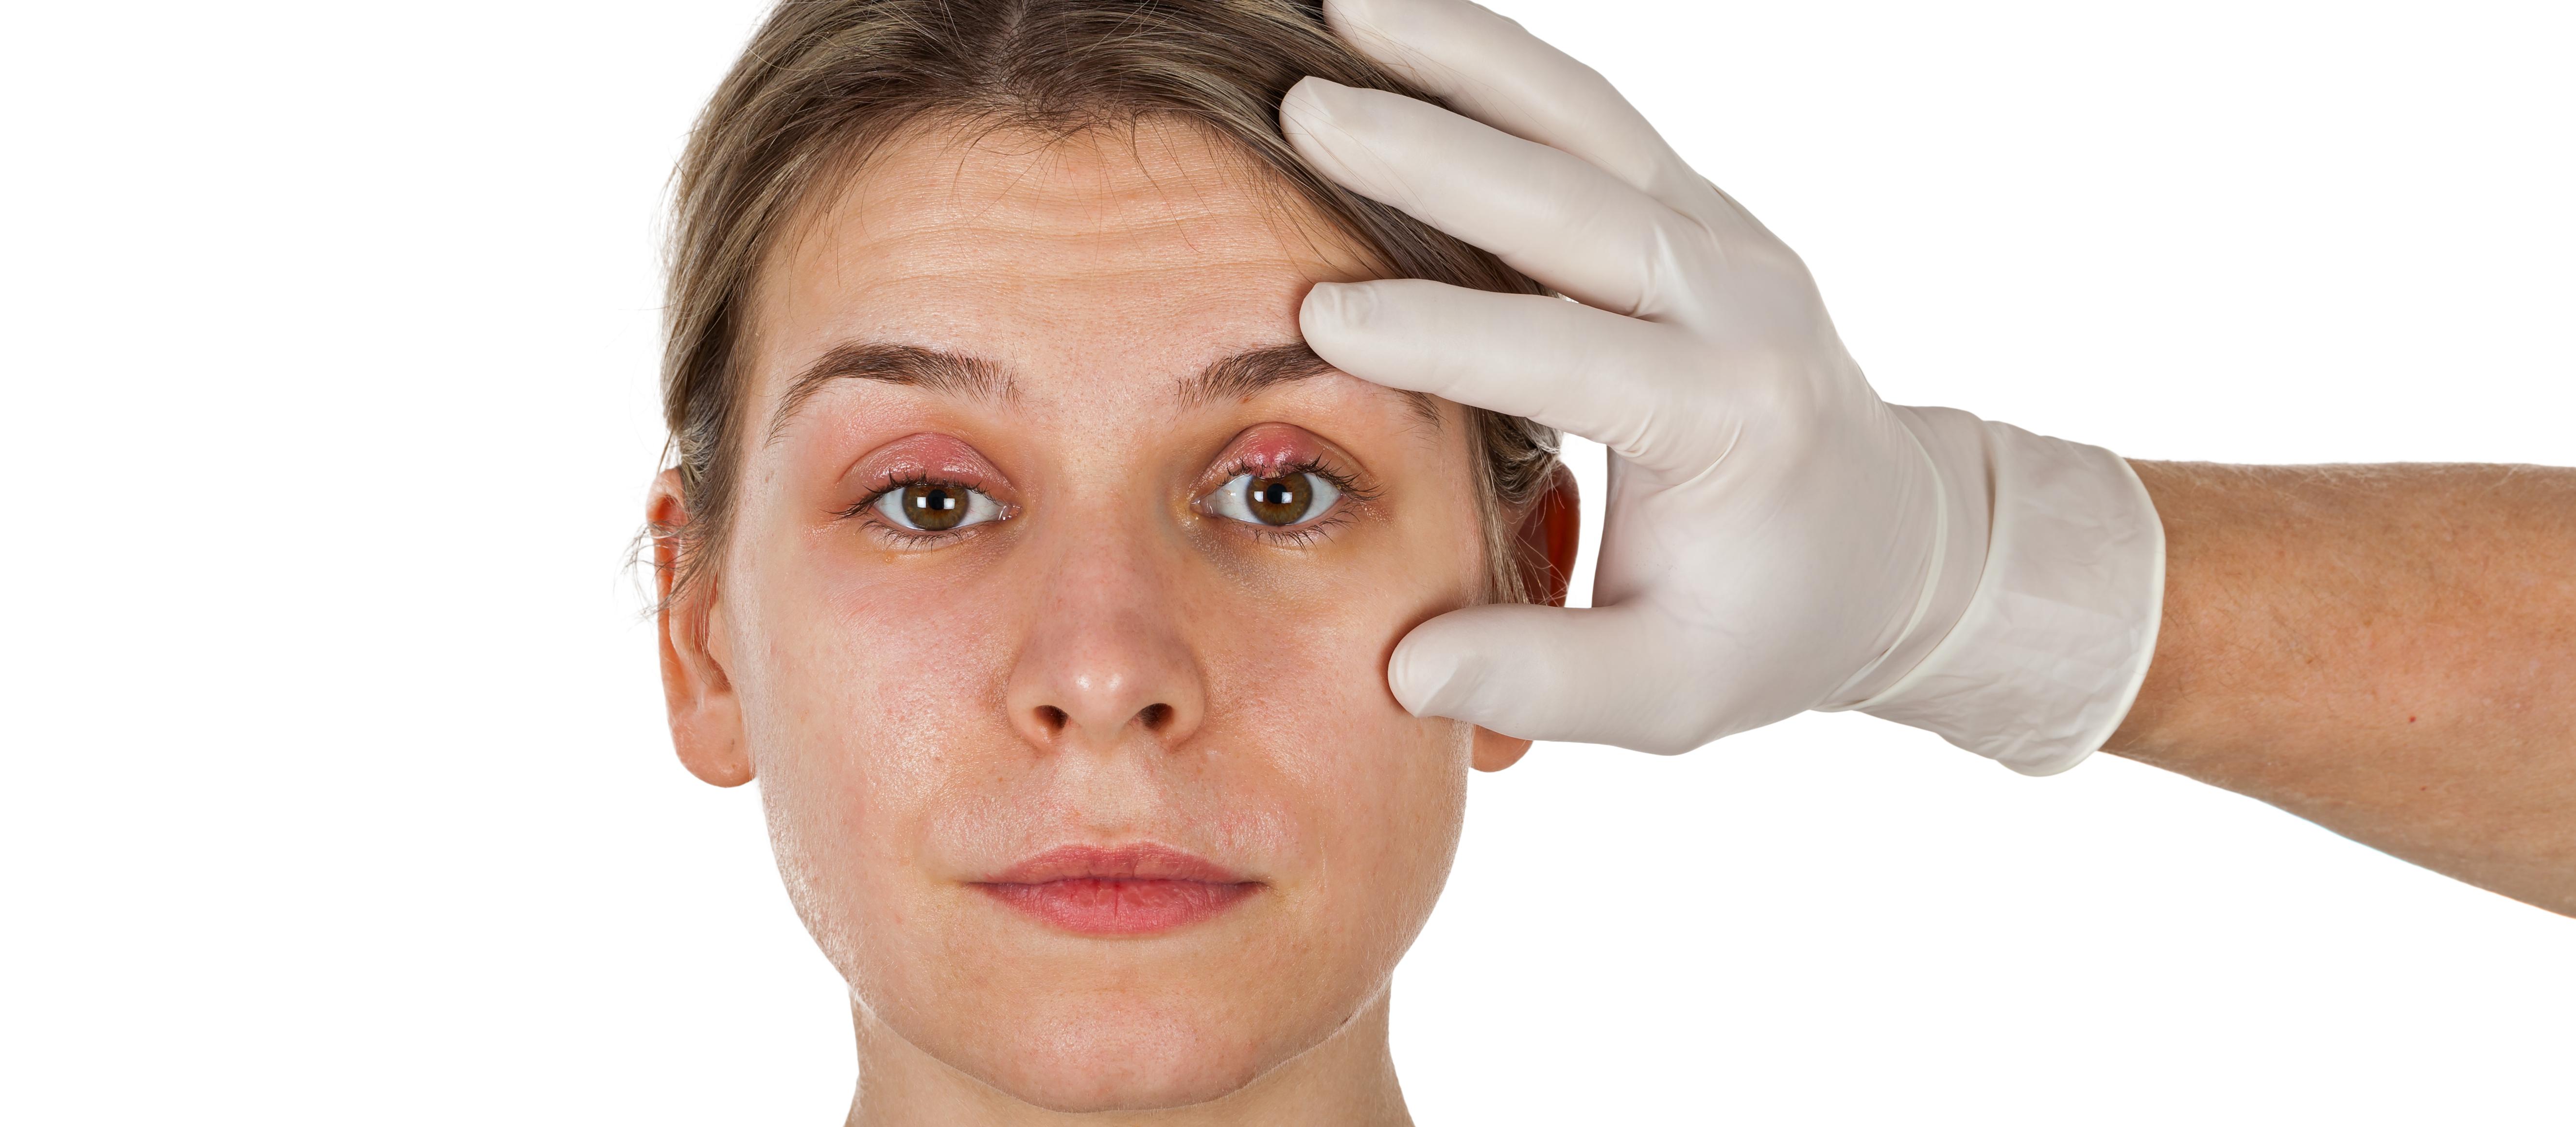 Woman with an eye infection and lump